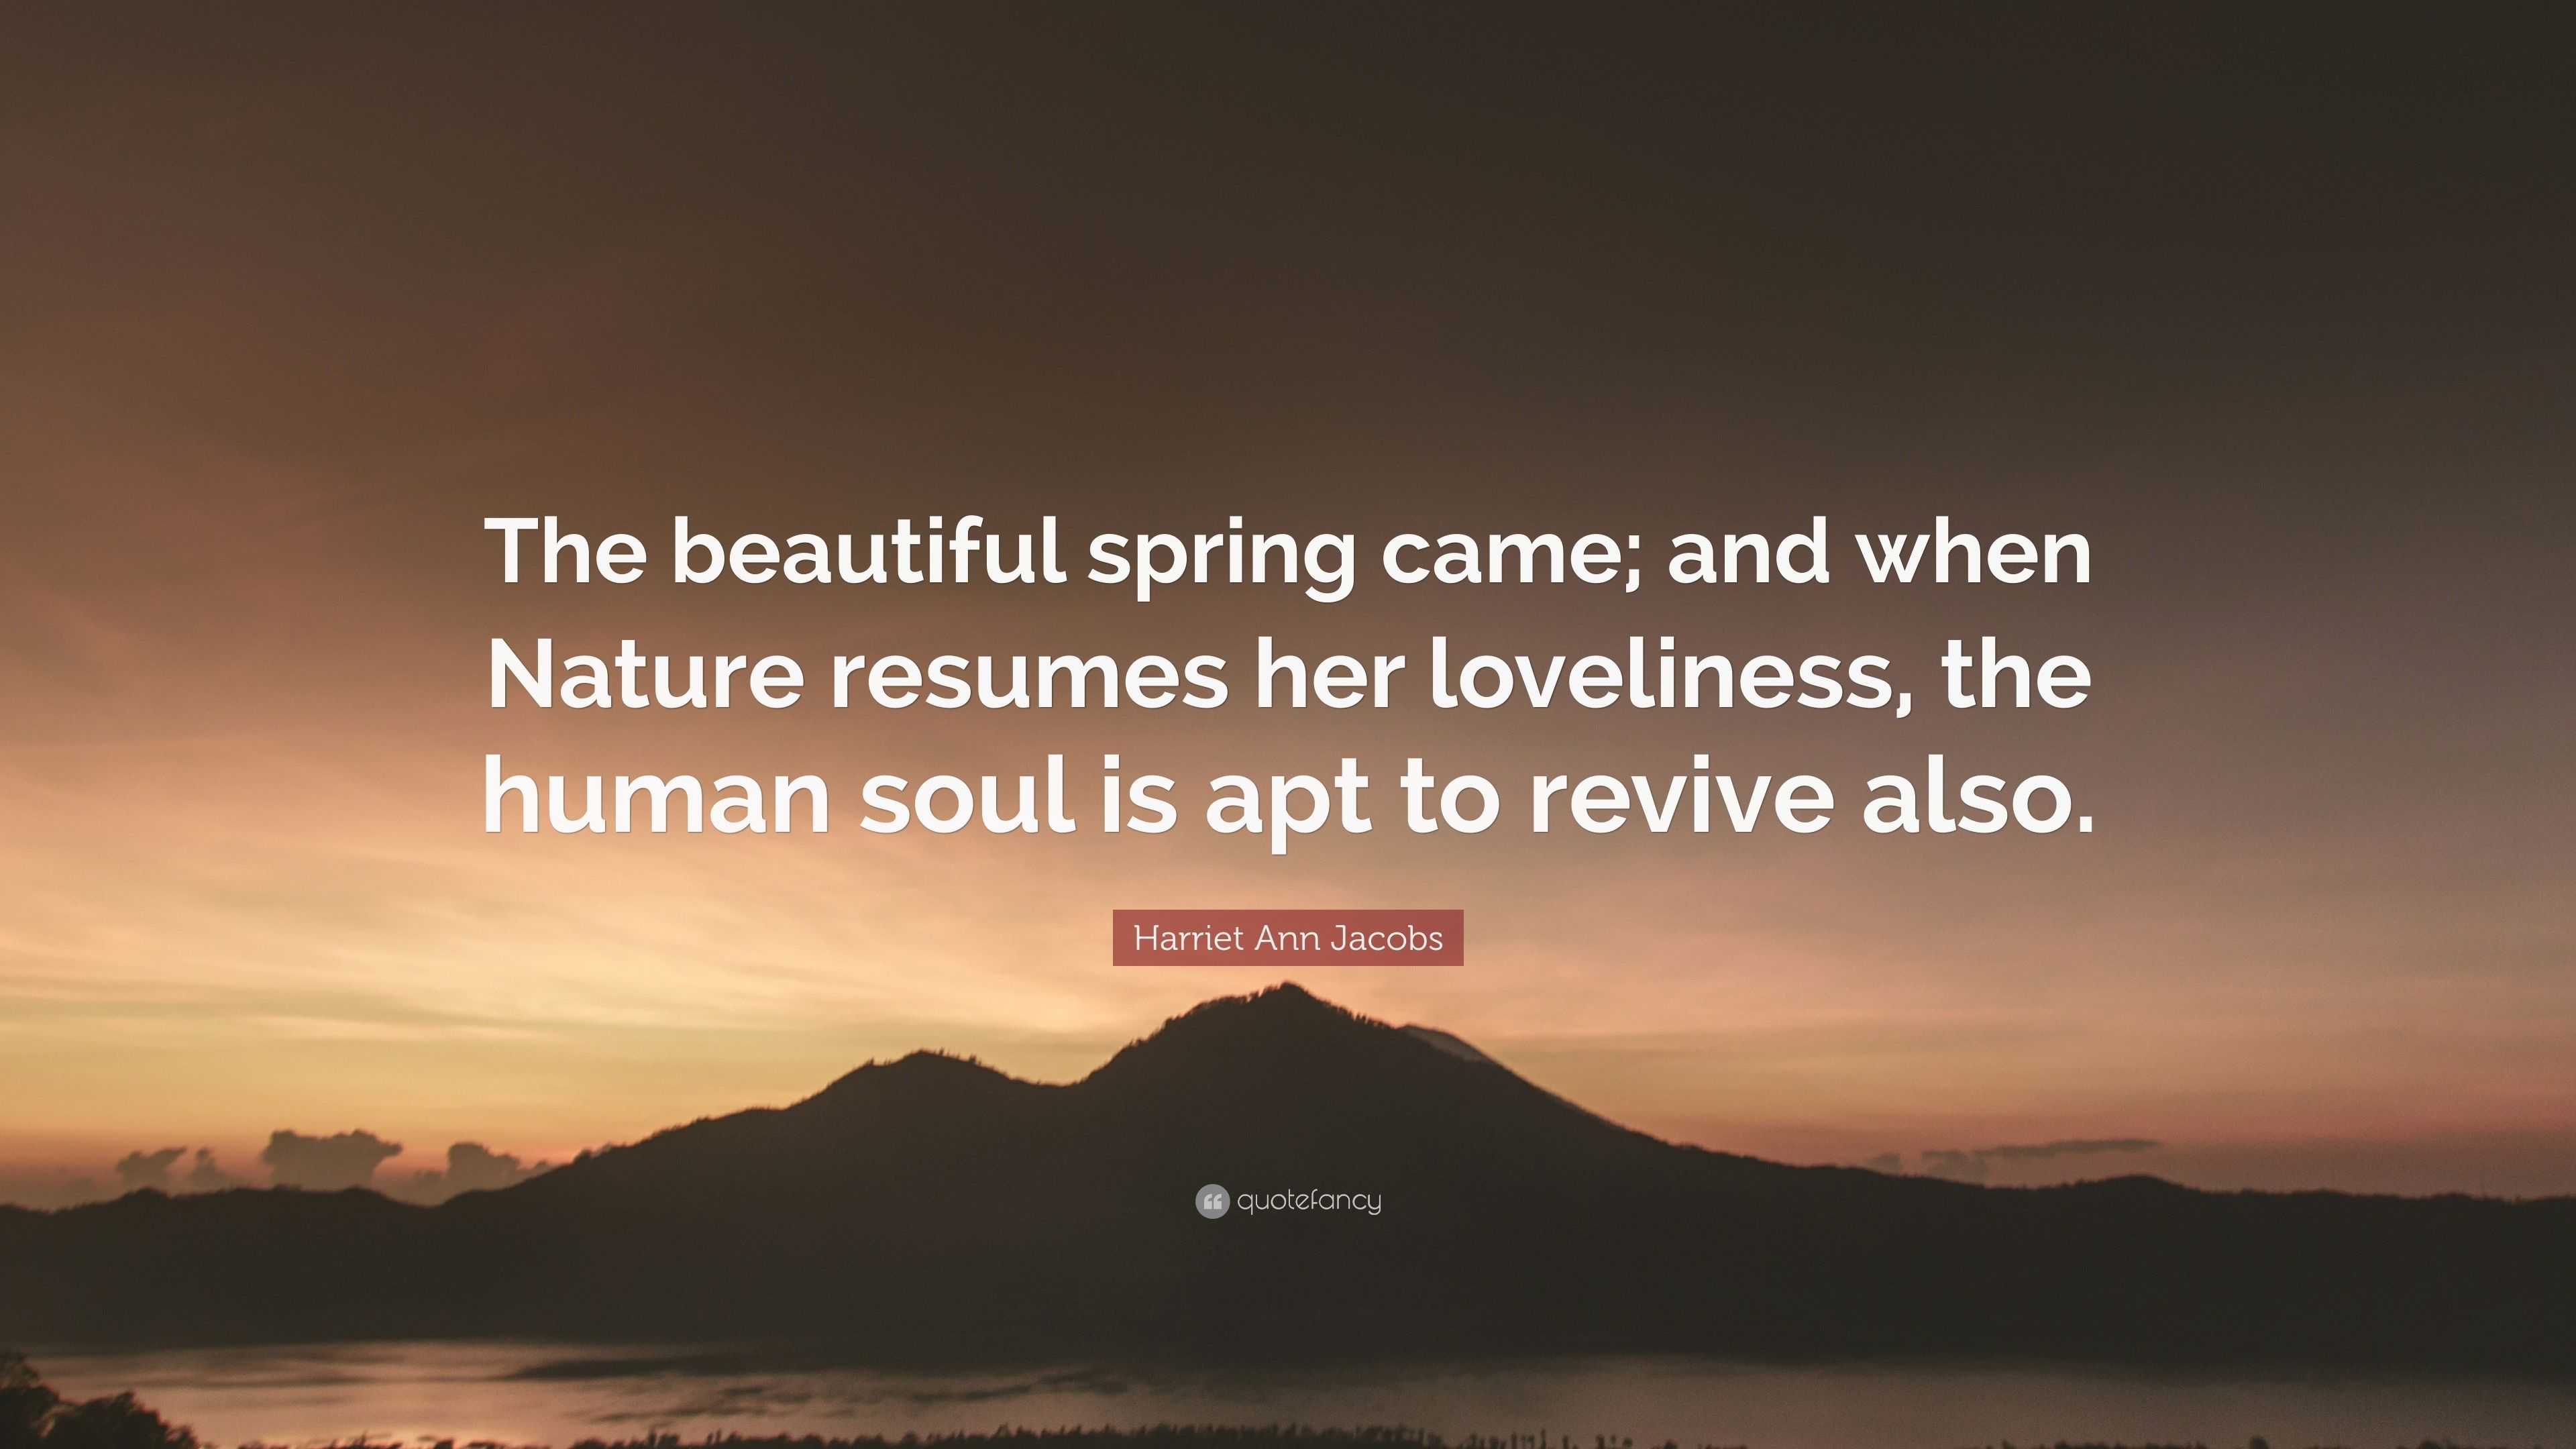 Harriet Ann Jacobs Quote: “The beautiful spring came; and when Nature